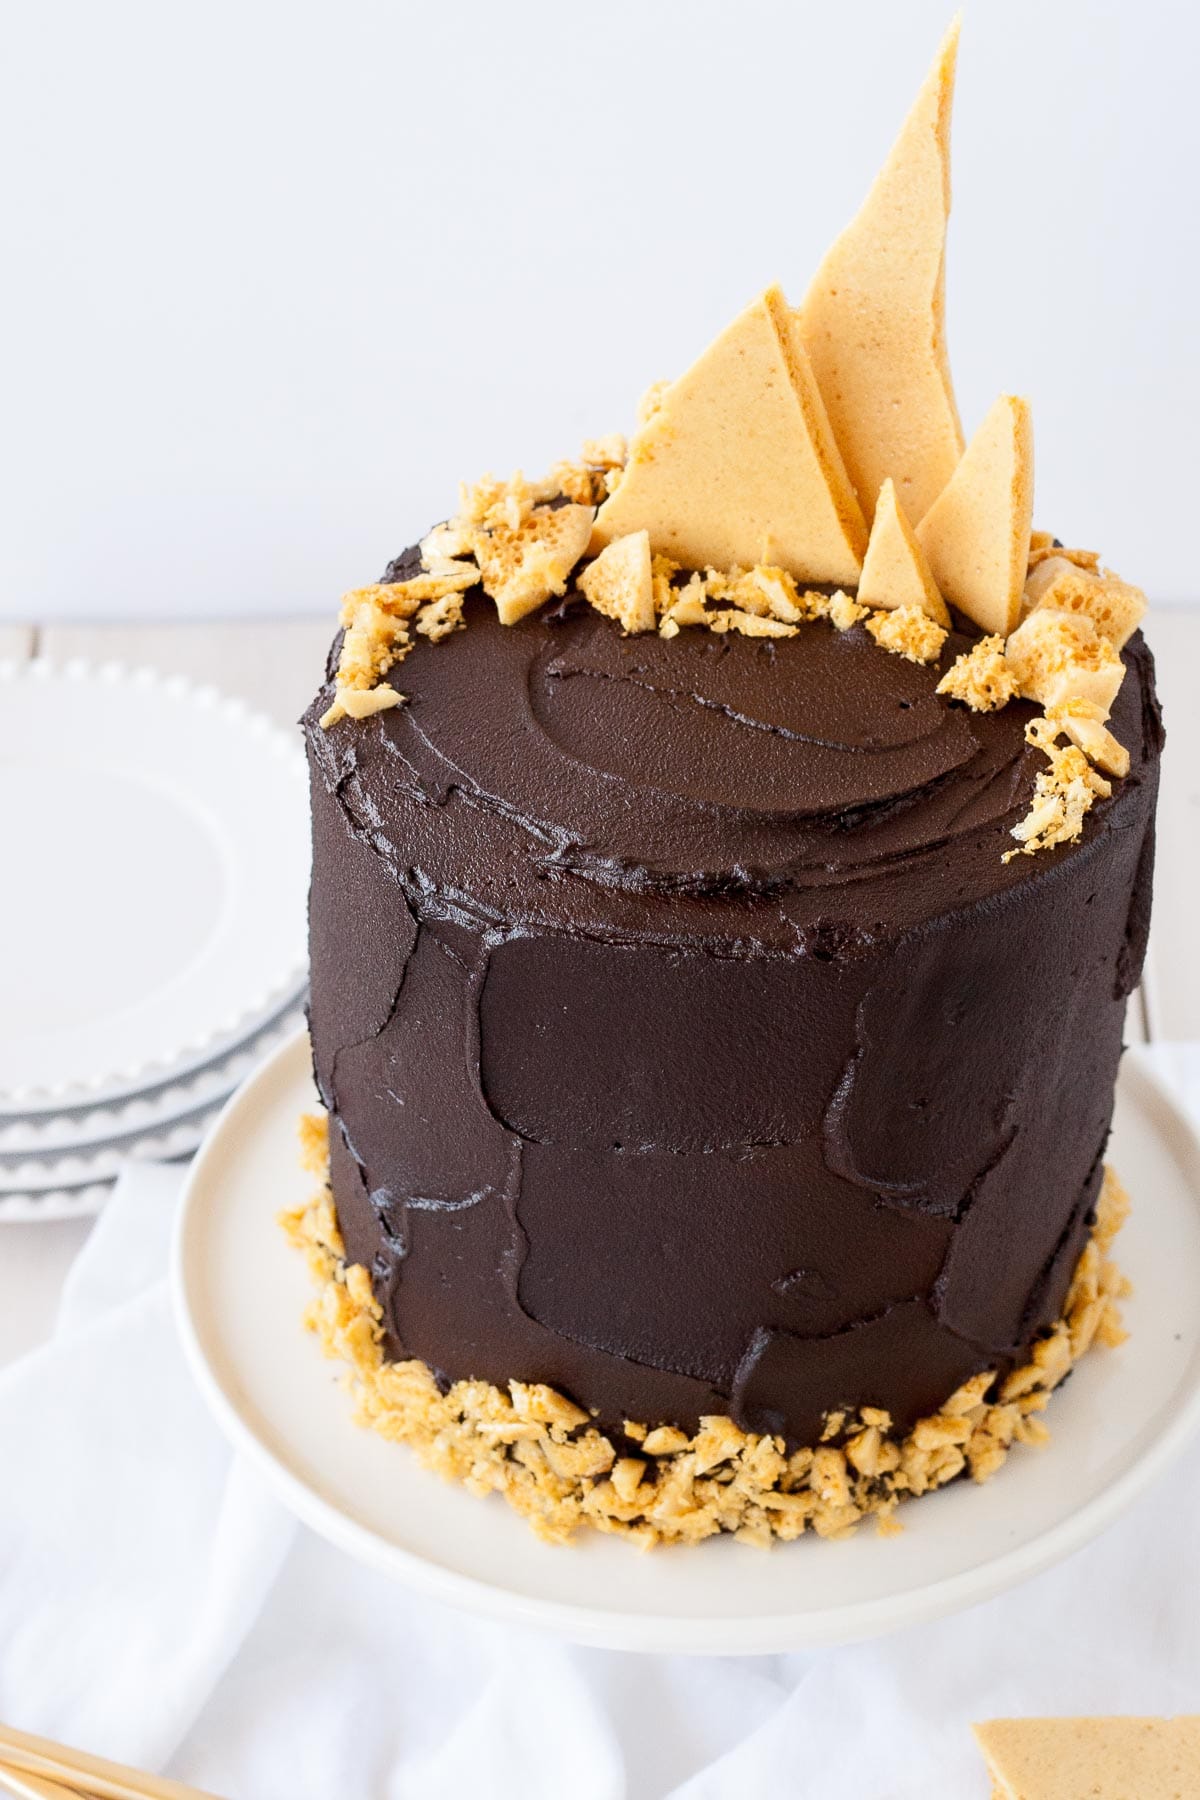 Chocolate cake with honeycomb shards on the top.